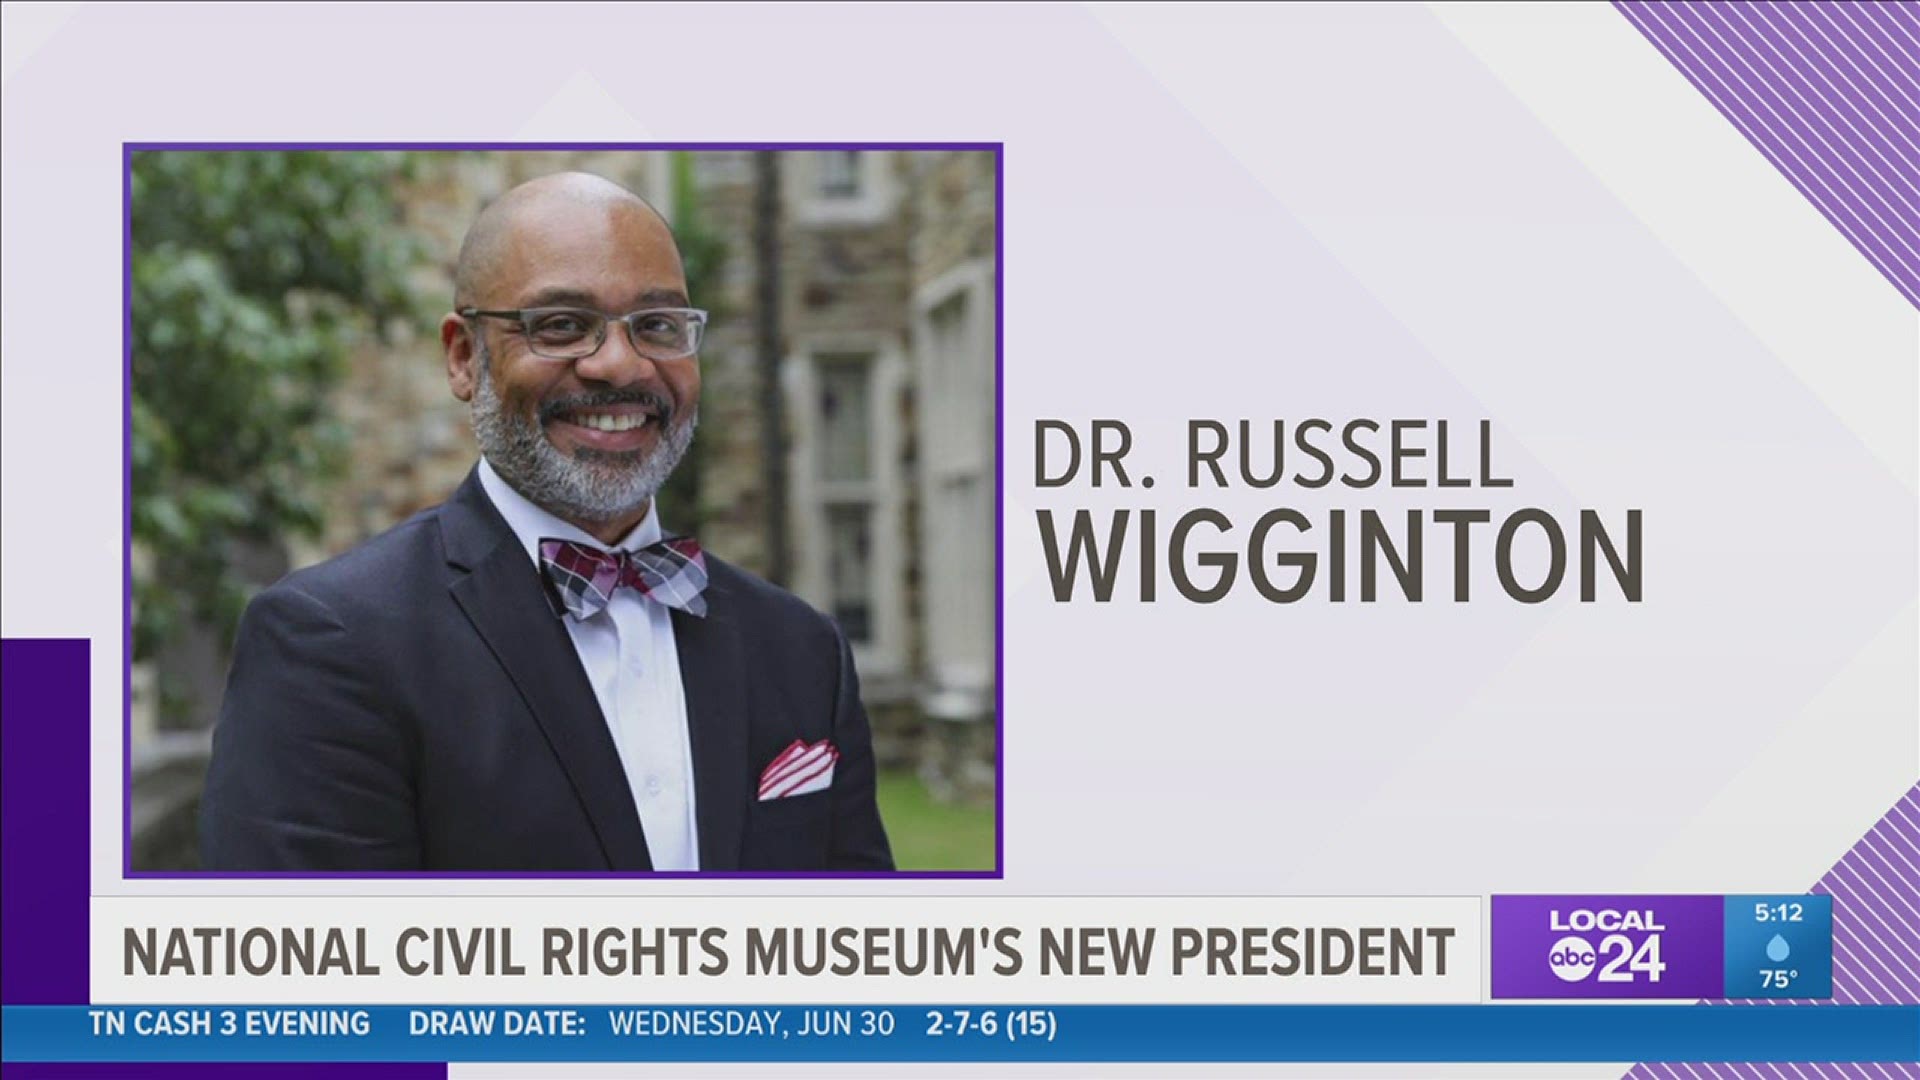 Dr. Russell Wigginton will take over as the museum’s next president starting August 1, 2021.